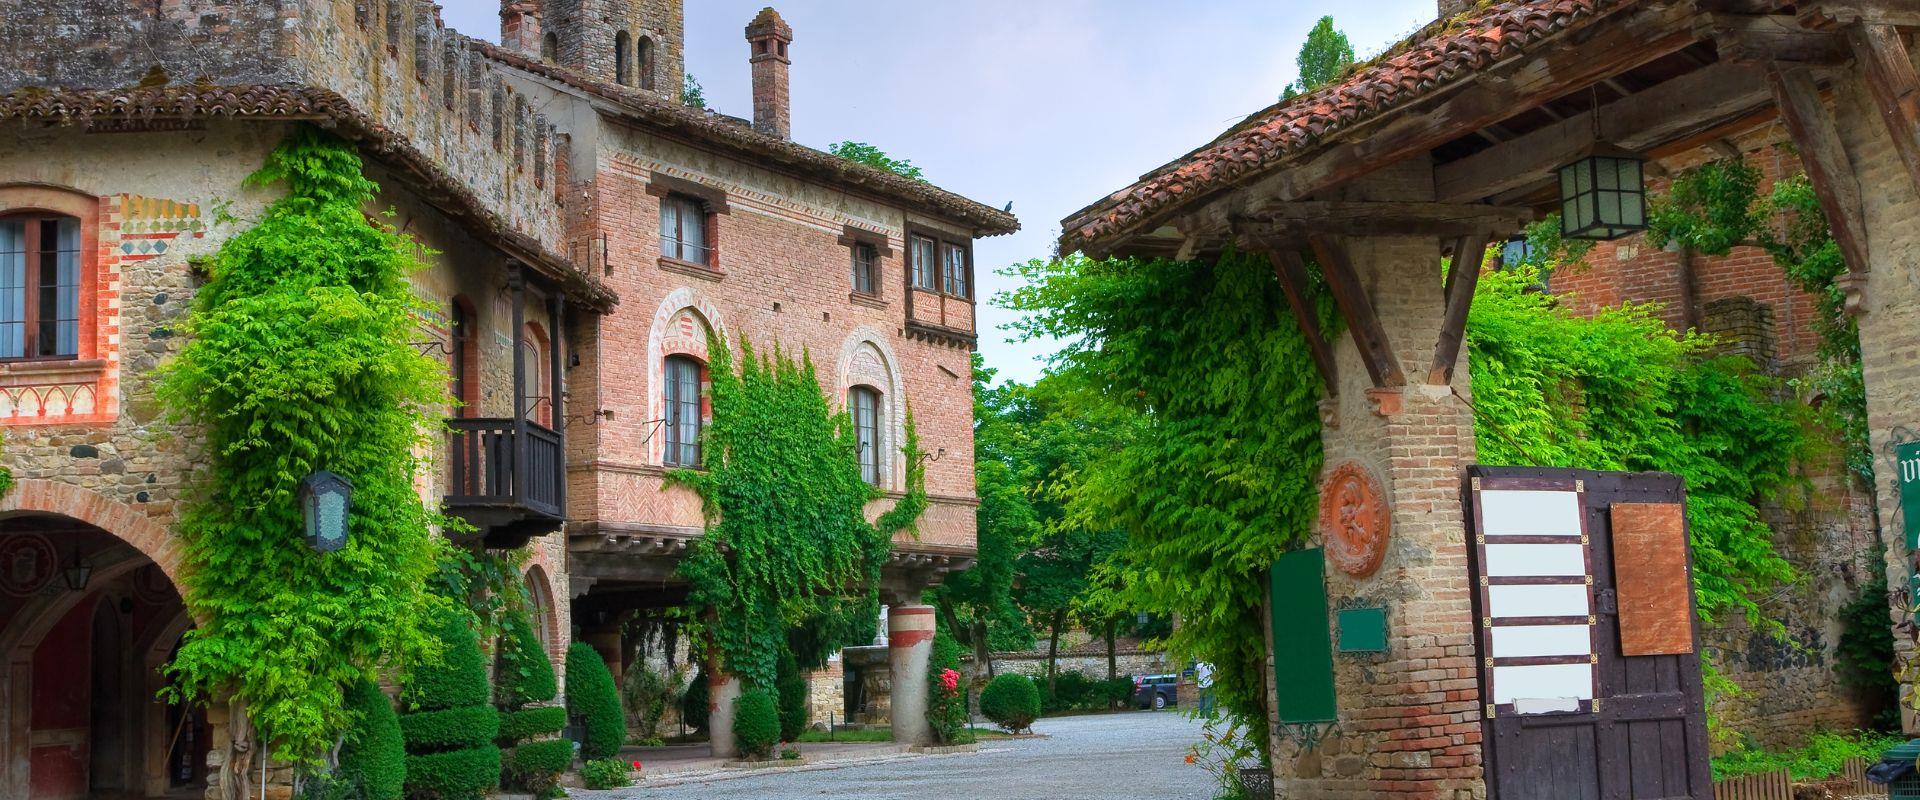 Discover the historical itinerary proposed by the Best Western Park Hotel, to admire castles and fortresses of the Piacenza area.